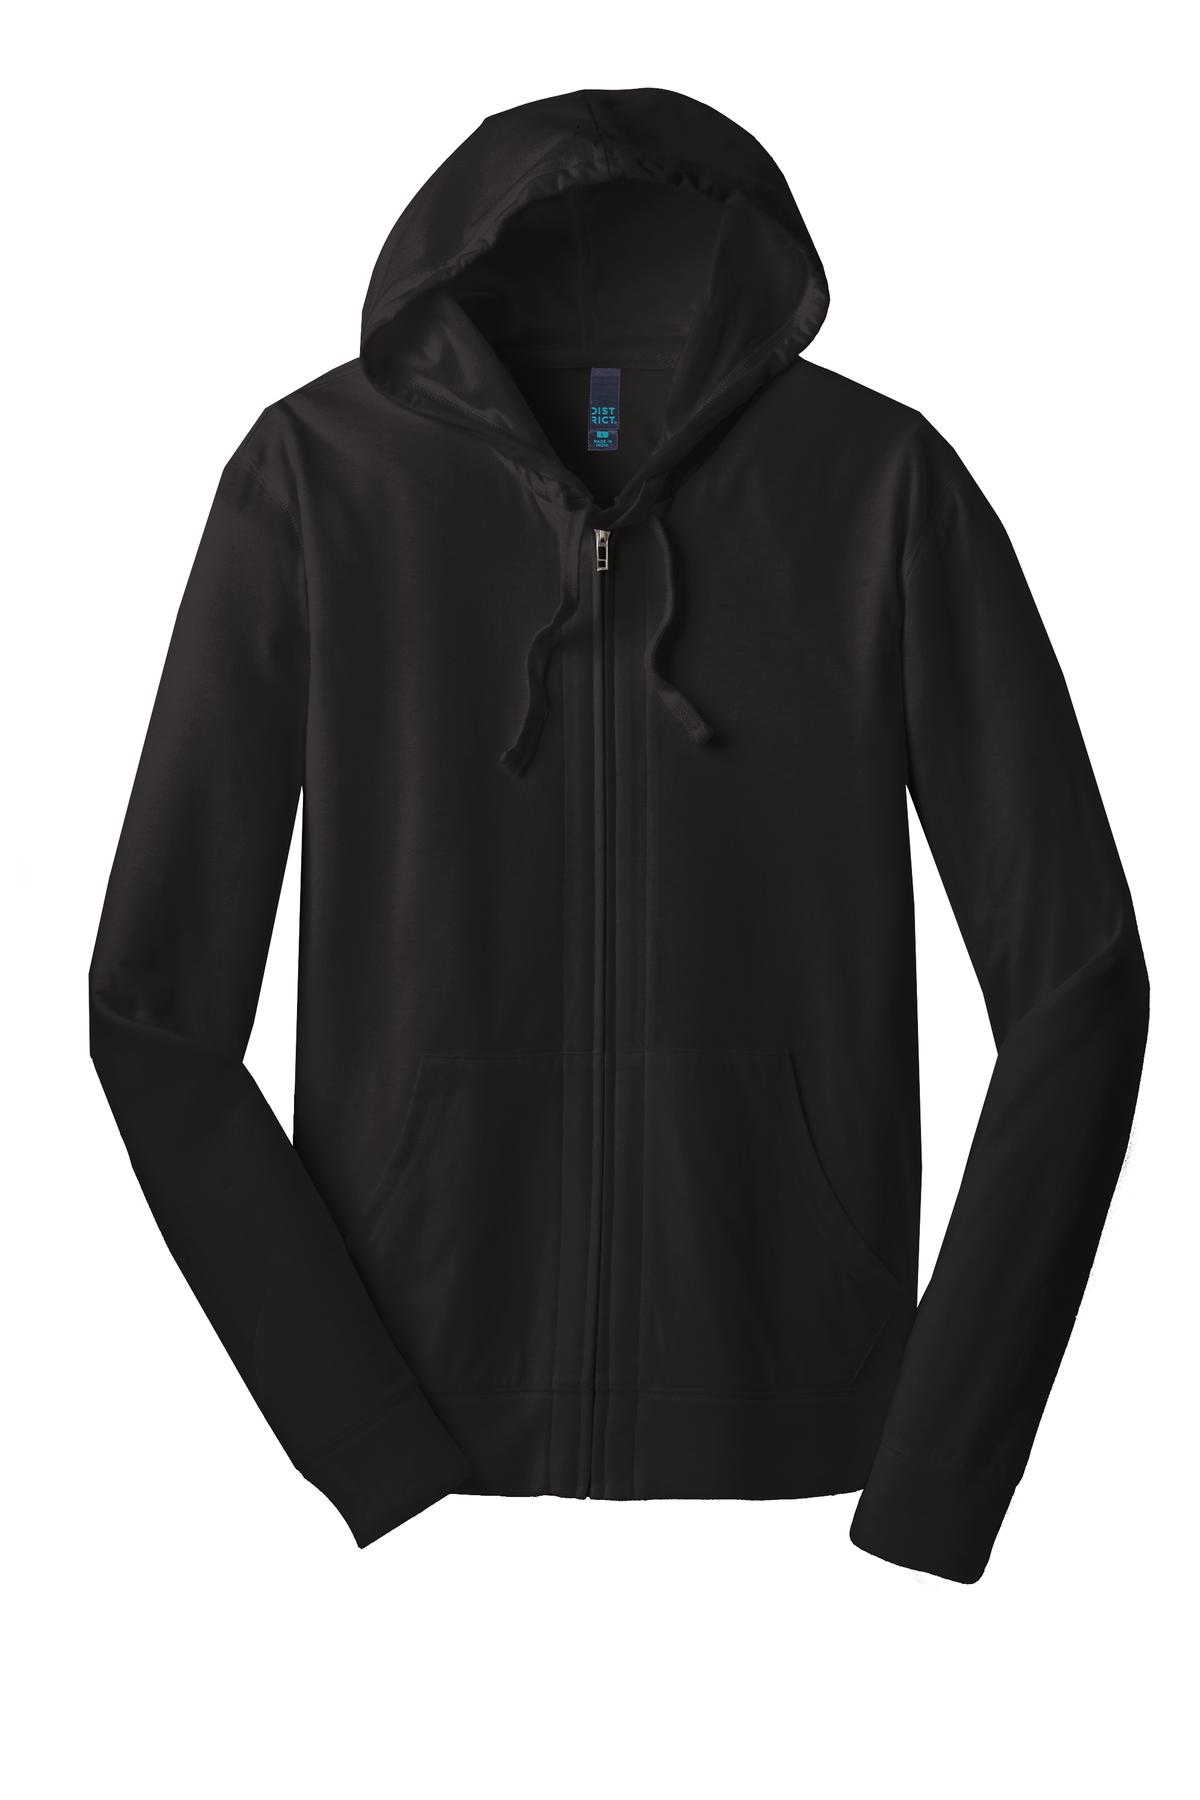 District Young Mens Jersey Full Zip Hoodie-L (Black) - image 5 of 6